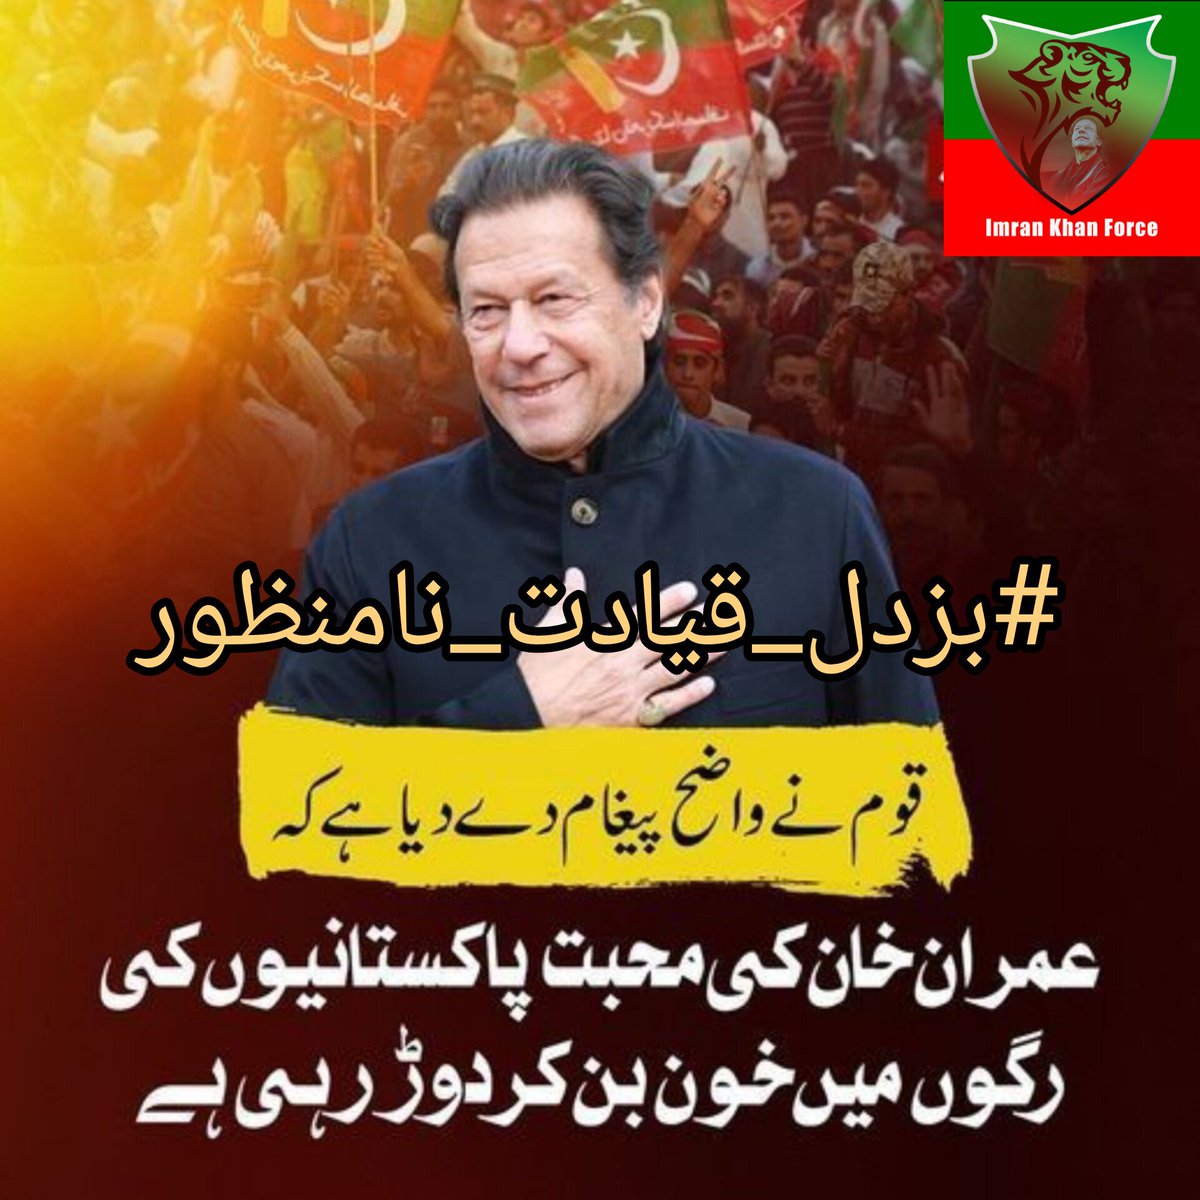 I @Guriya_755___ belives that It is the duty of the party leadership to stand up for justice and ensure that Imran Khan is released from custody. @Team_IKF #بزدل_قیادت_نامنظور